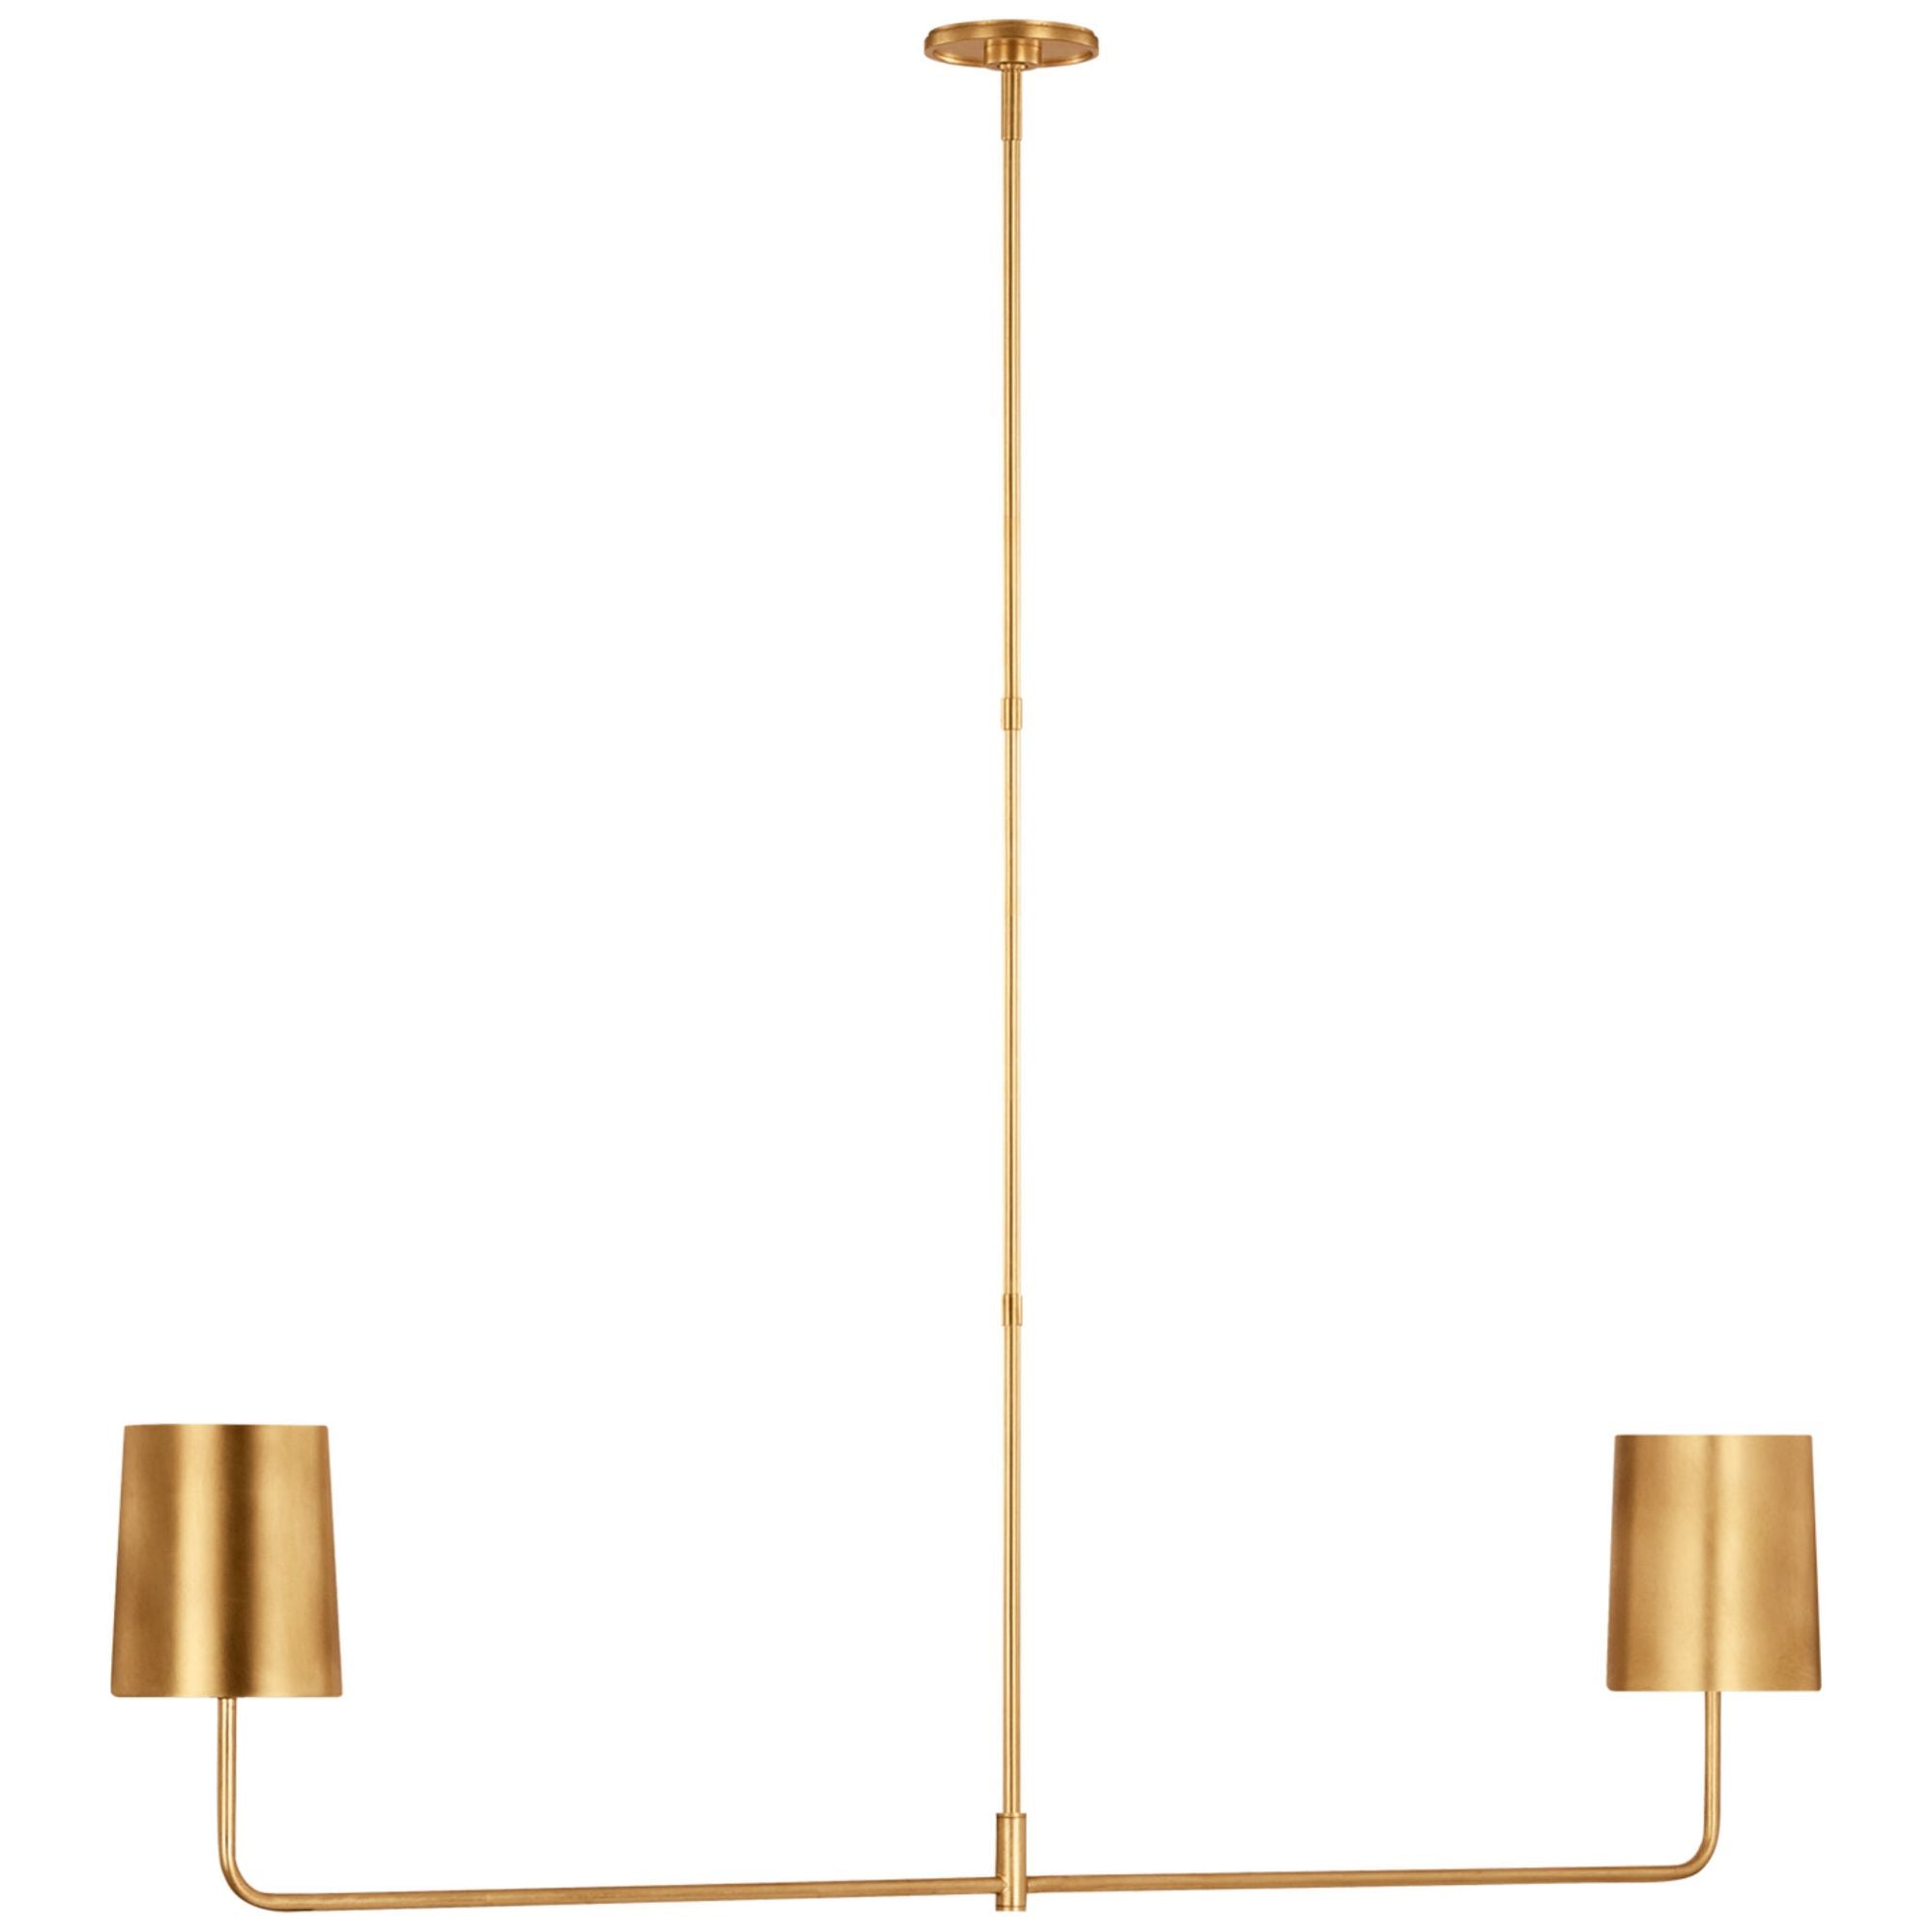 Barbara Barry Go Lightly 54" Two Light Linear Chandelier in Gild with Gild Shades